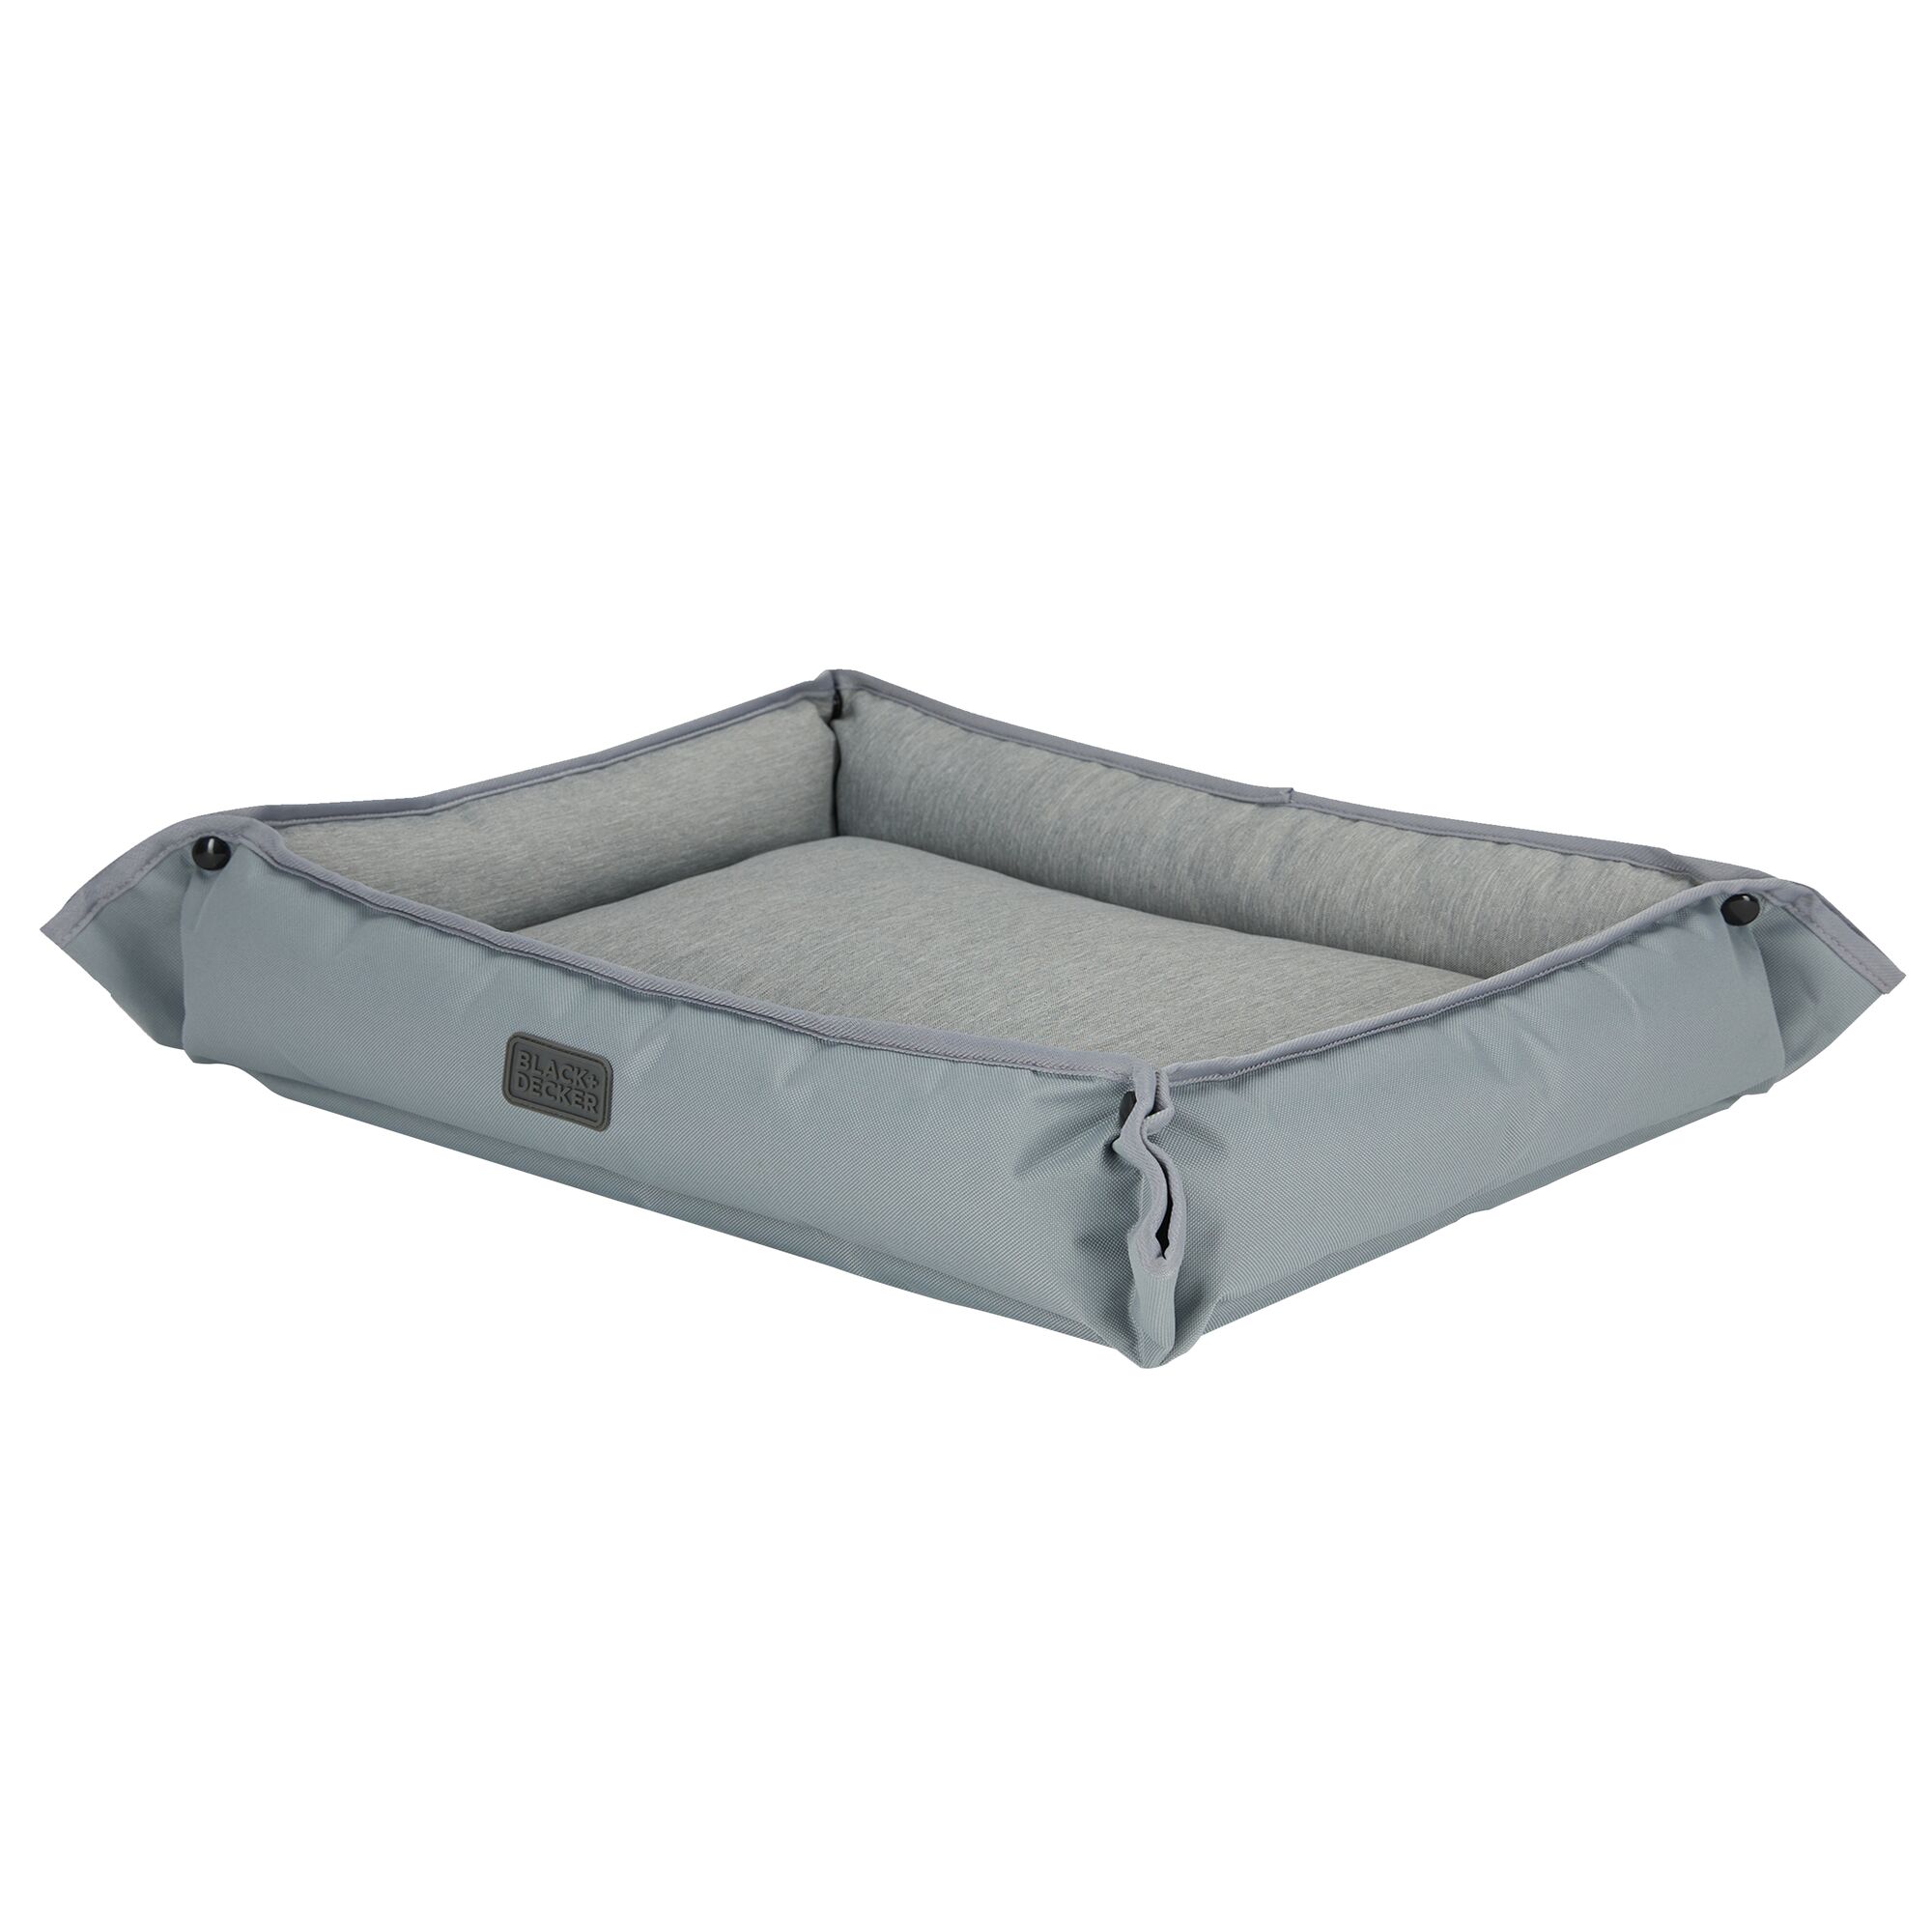 Profile of gray plush four-sided BLACK-DECKER dog bed with bed placed at an angle